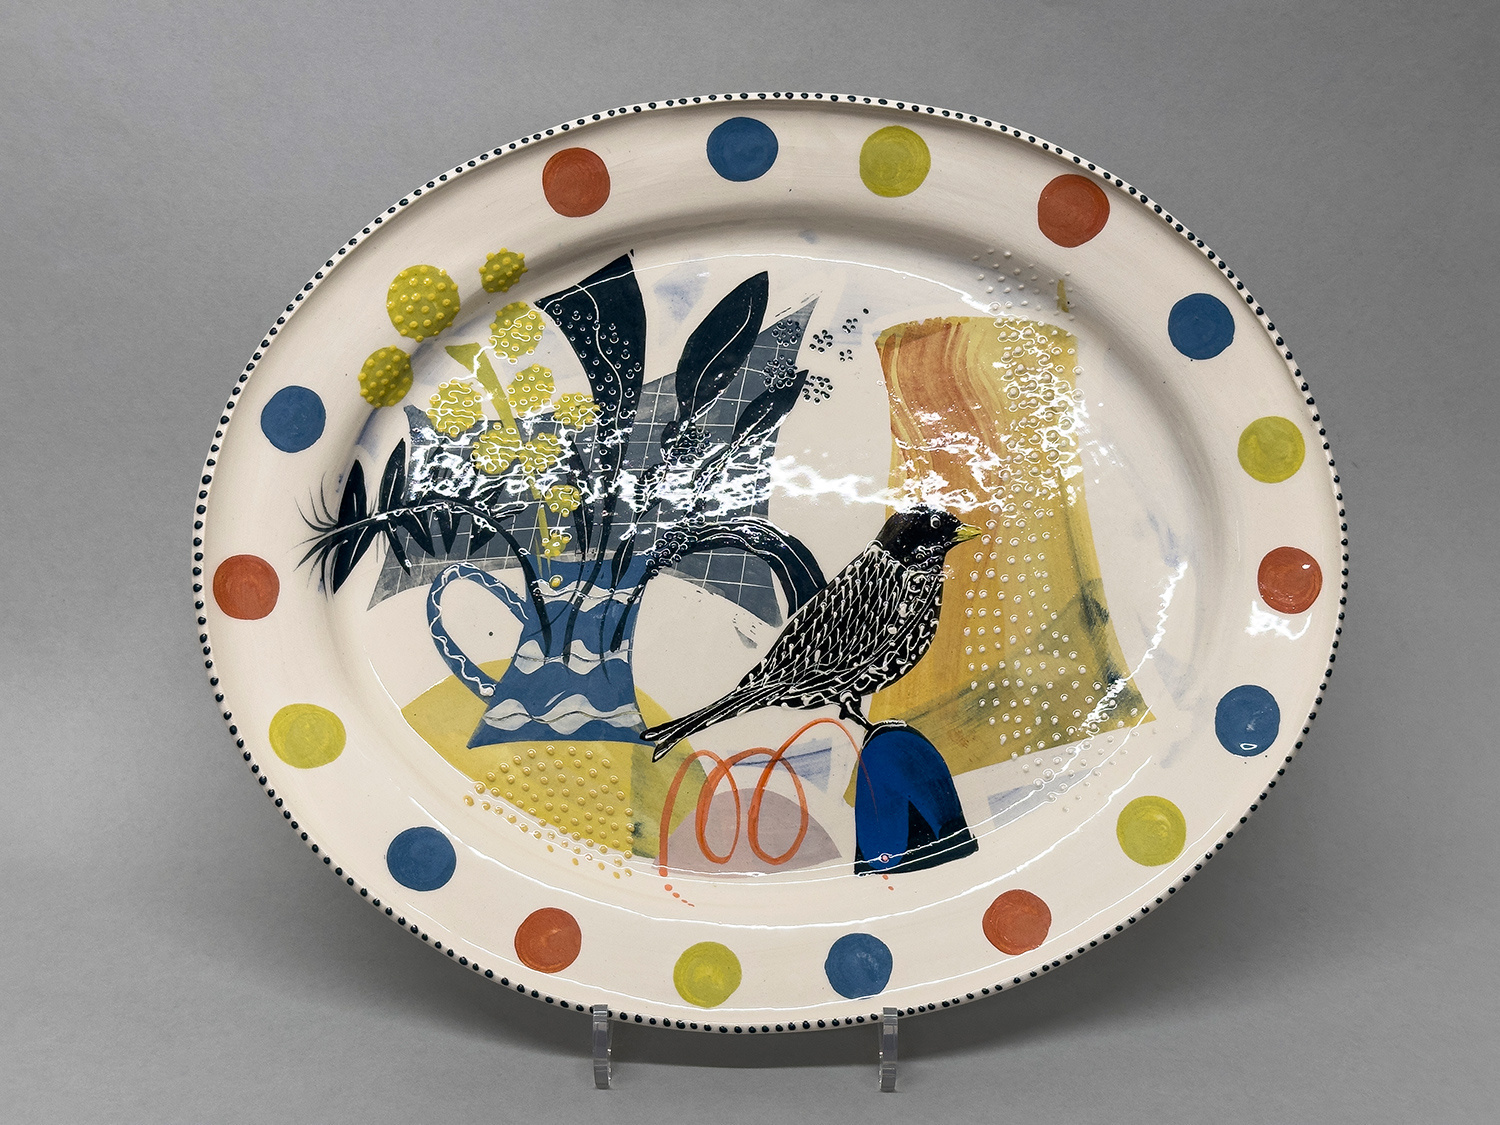 Large Oval Plate 'Still Life with Bird' by Irena Sibrijns